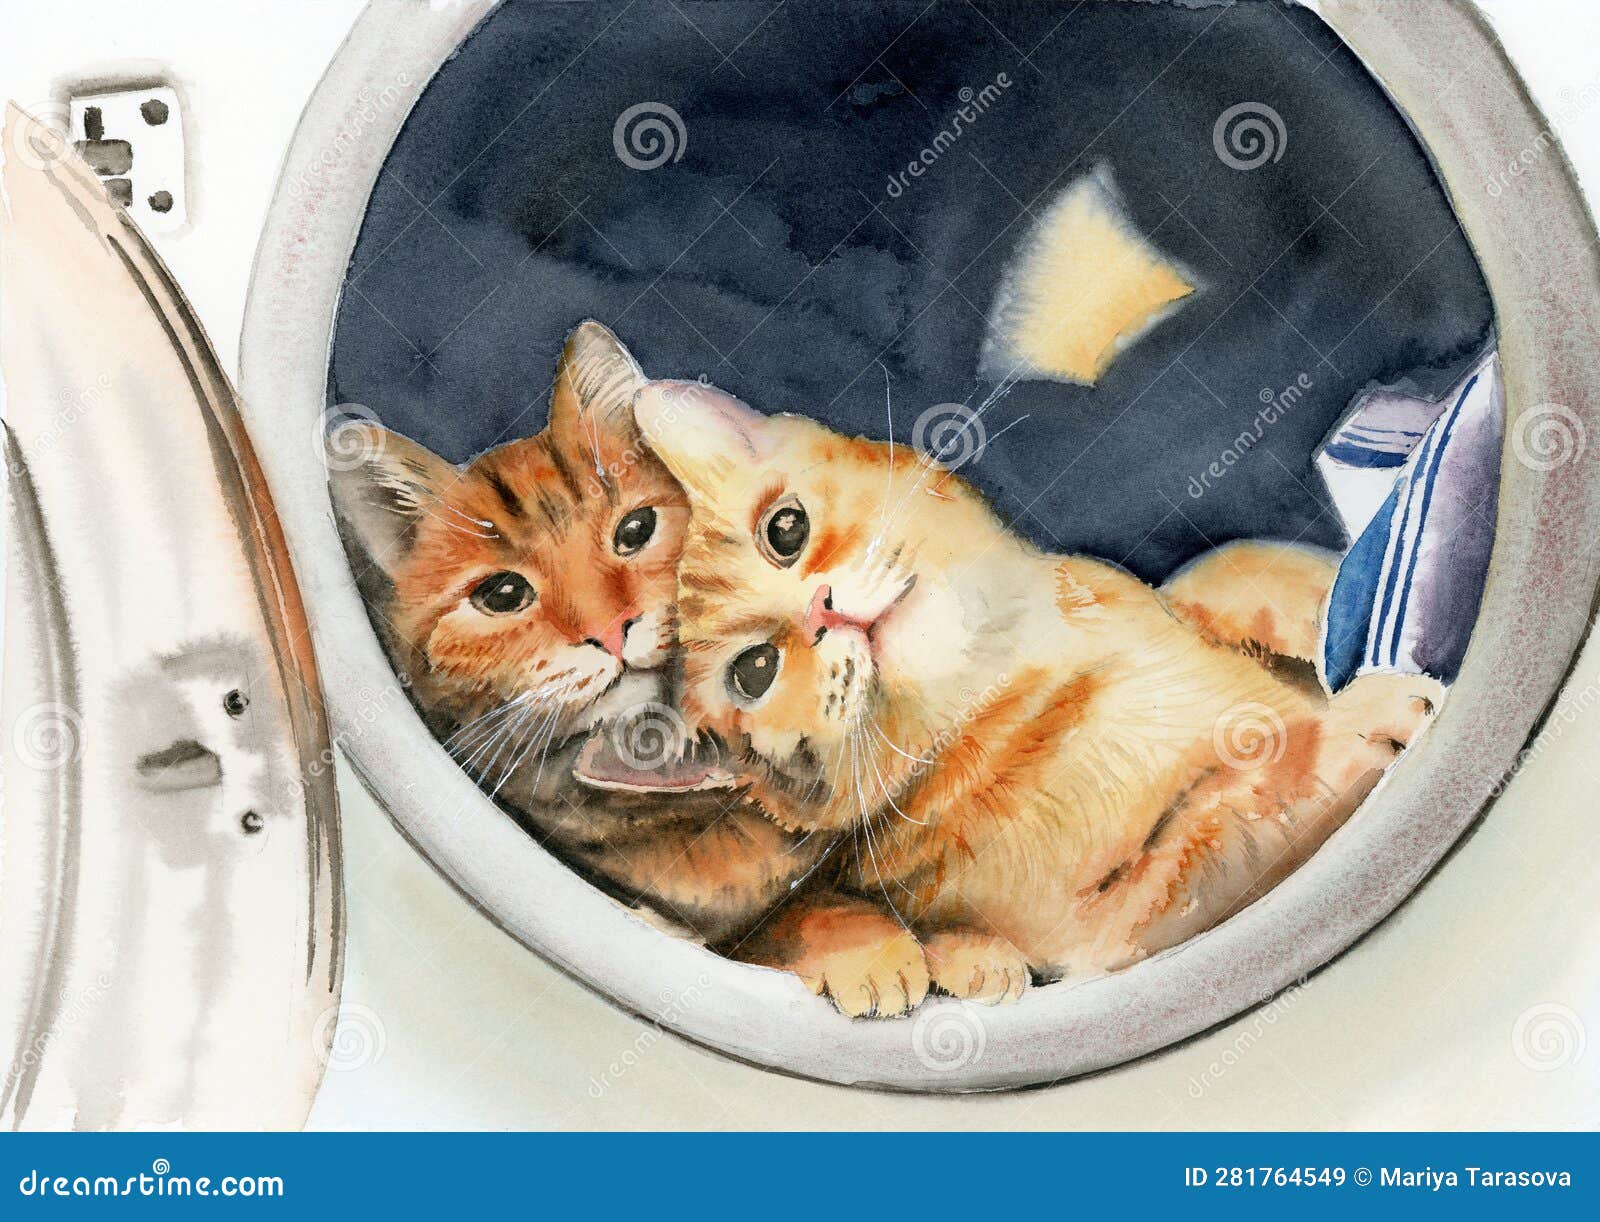 watercolor  of two funny ginger cats lying comfortably in an open washing machine